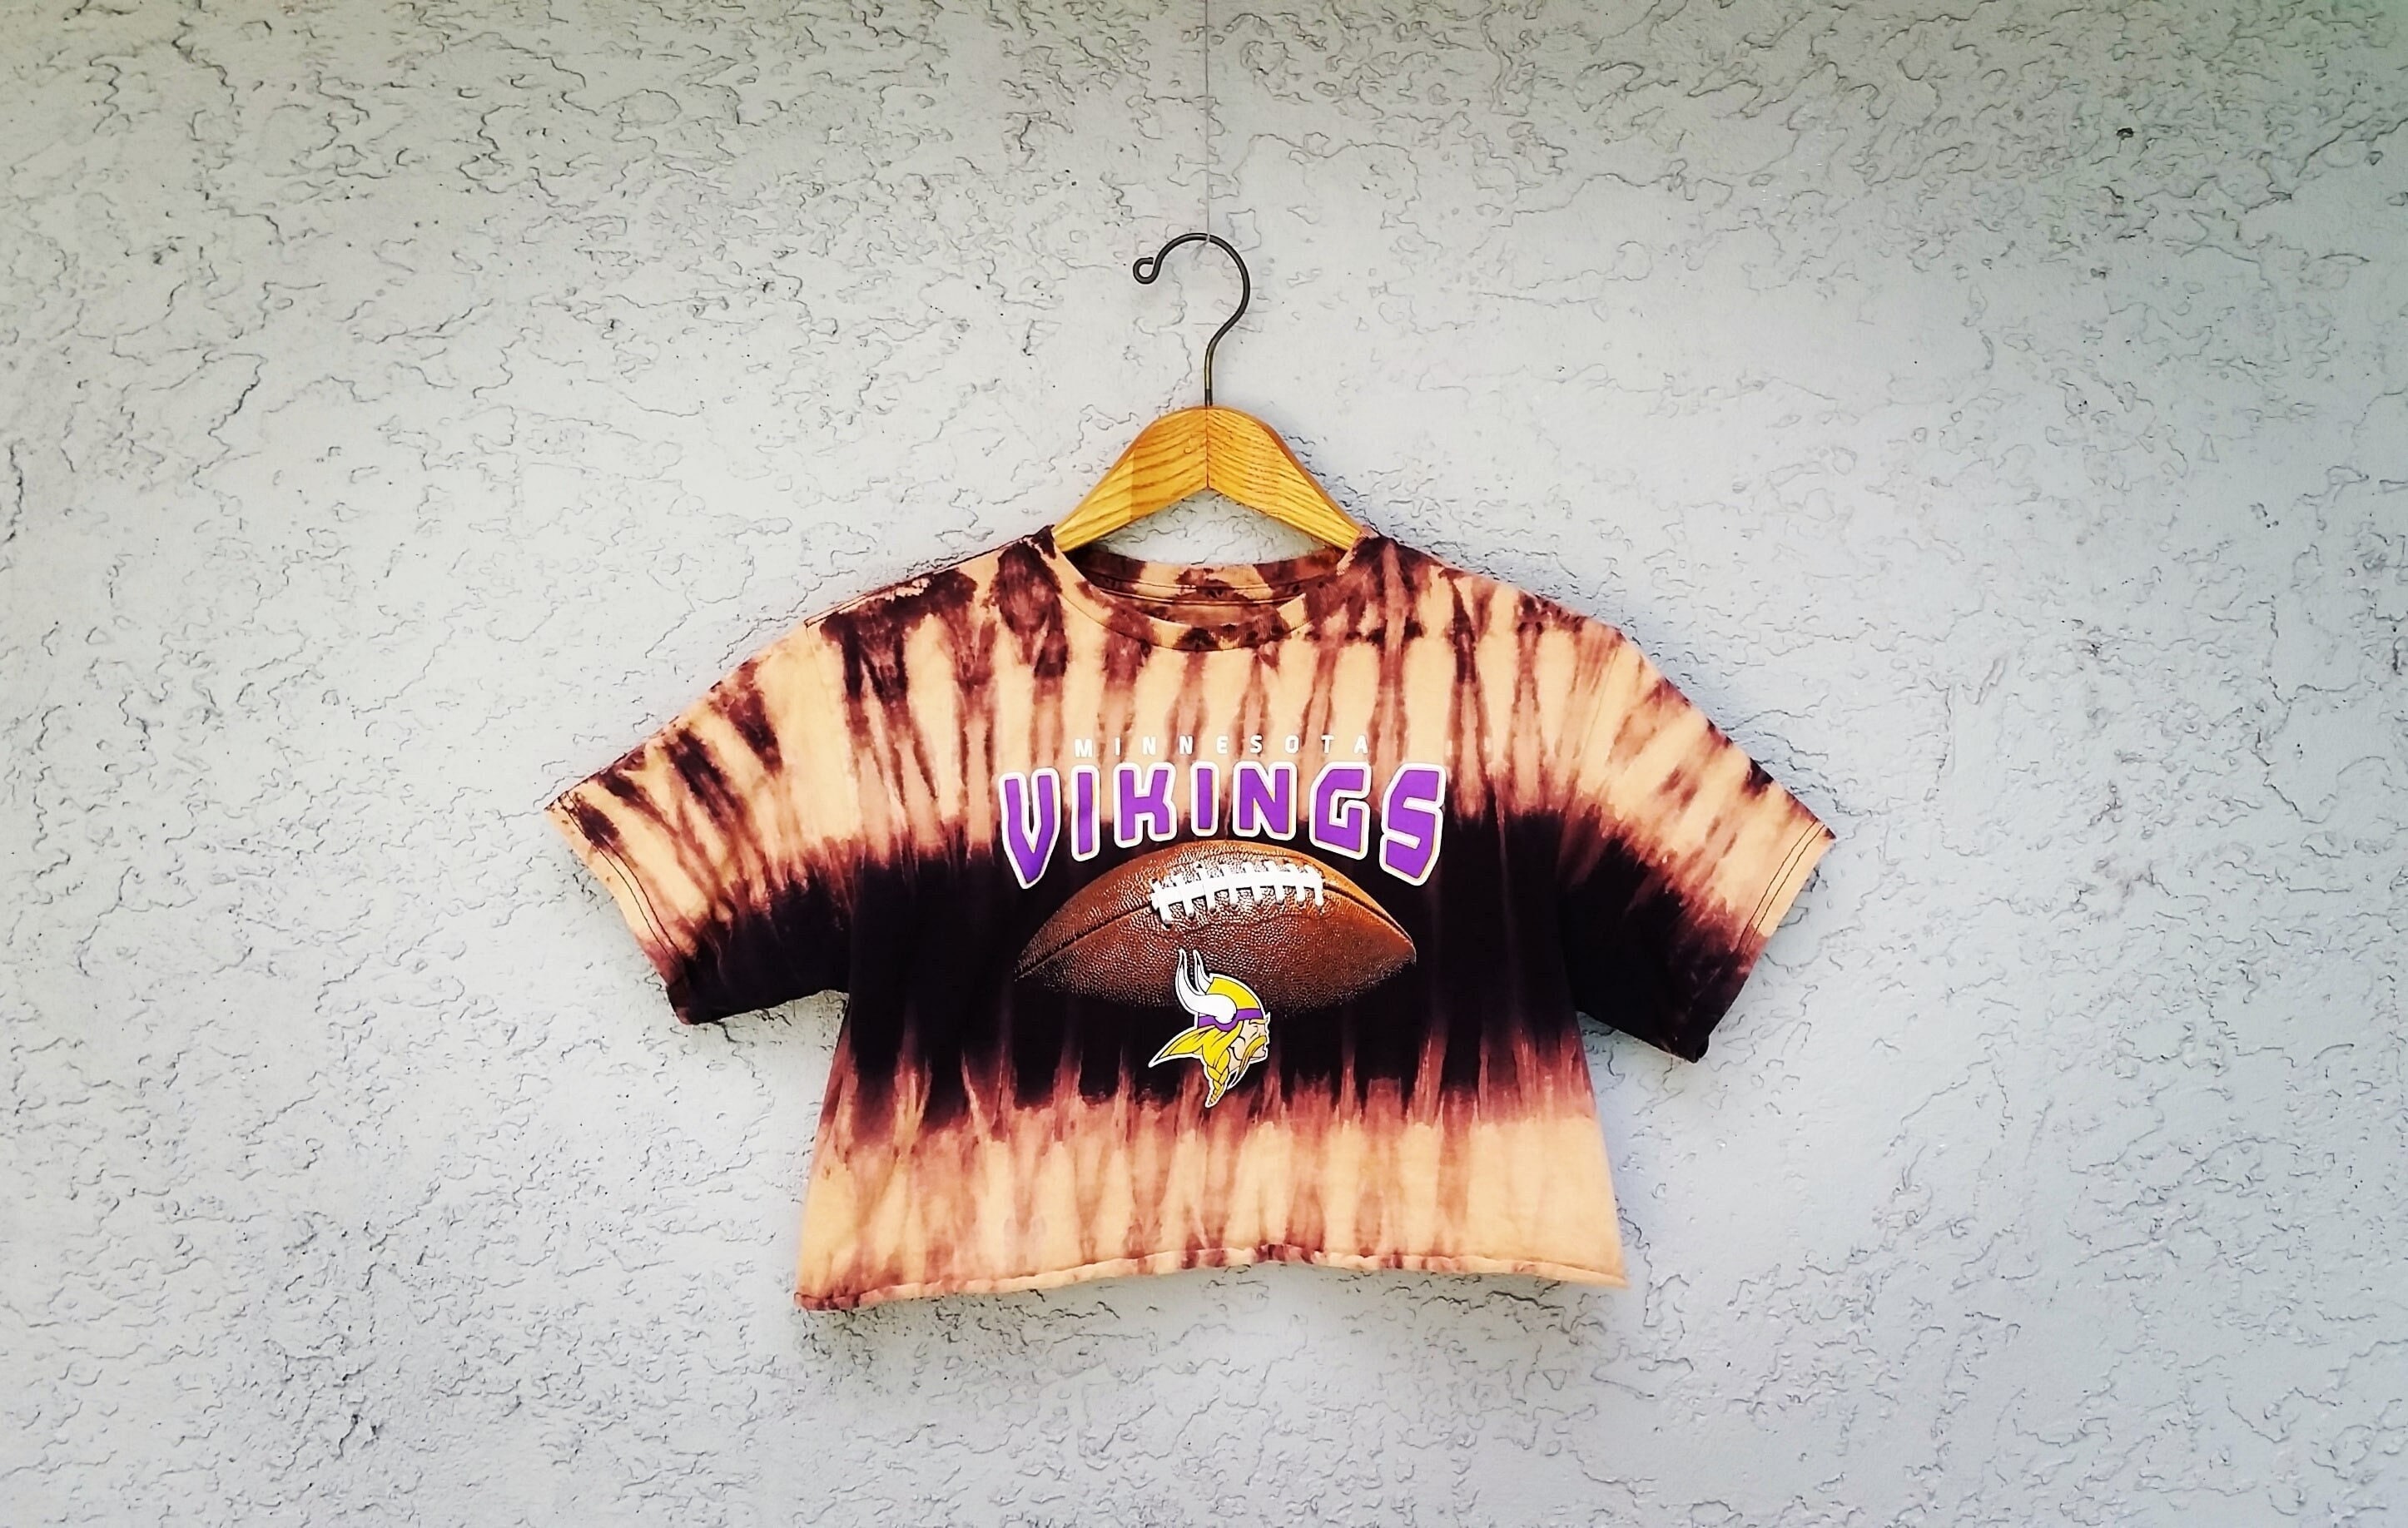 dayglodiva Reworked Minnesota Vikings Tie Dye Crop Top T-Shirt, Bleach Dyed Cropped Graphic Tee, Hand Dyed T Shirt, Tailgate Gear, Size S Small